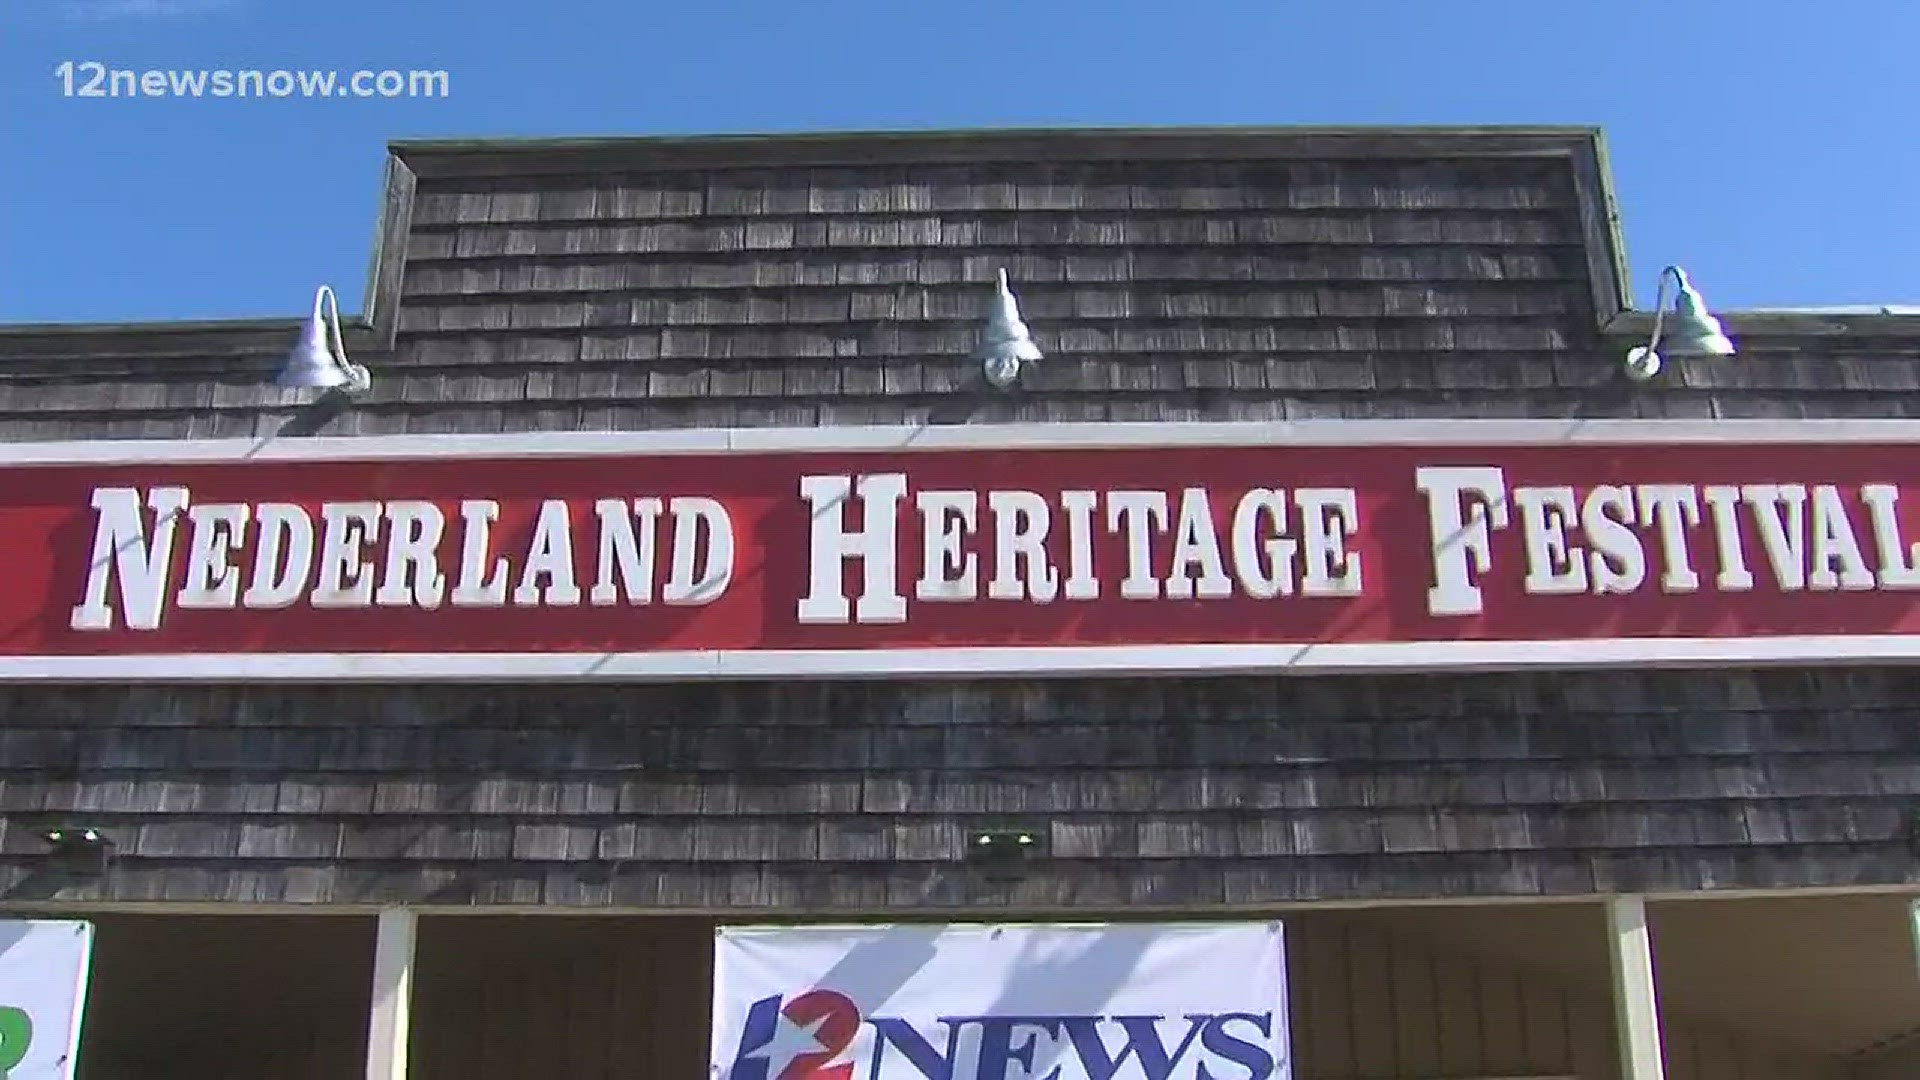 We asked festival goers if they knew the history behind the Nederland Heritage Festival